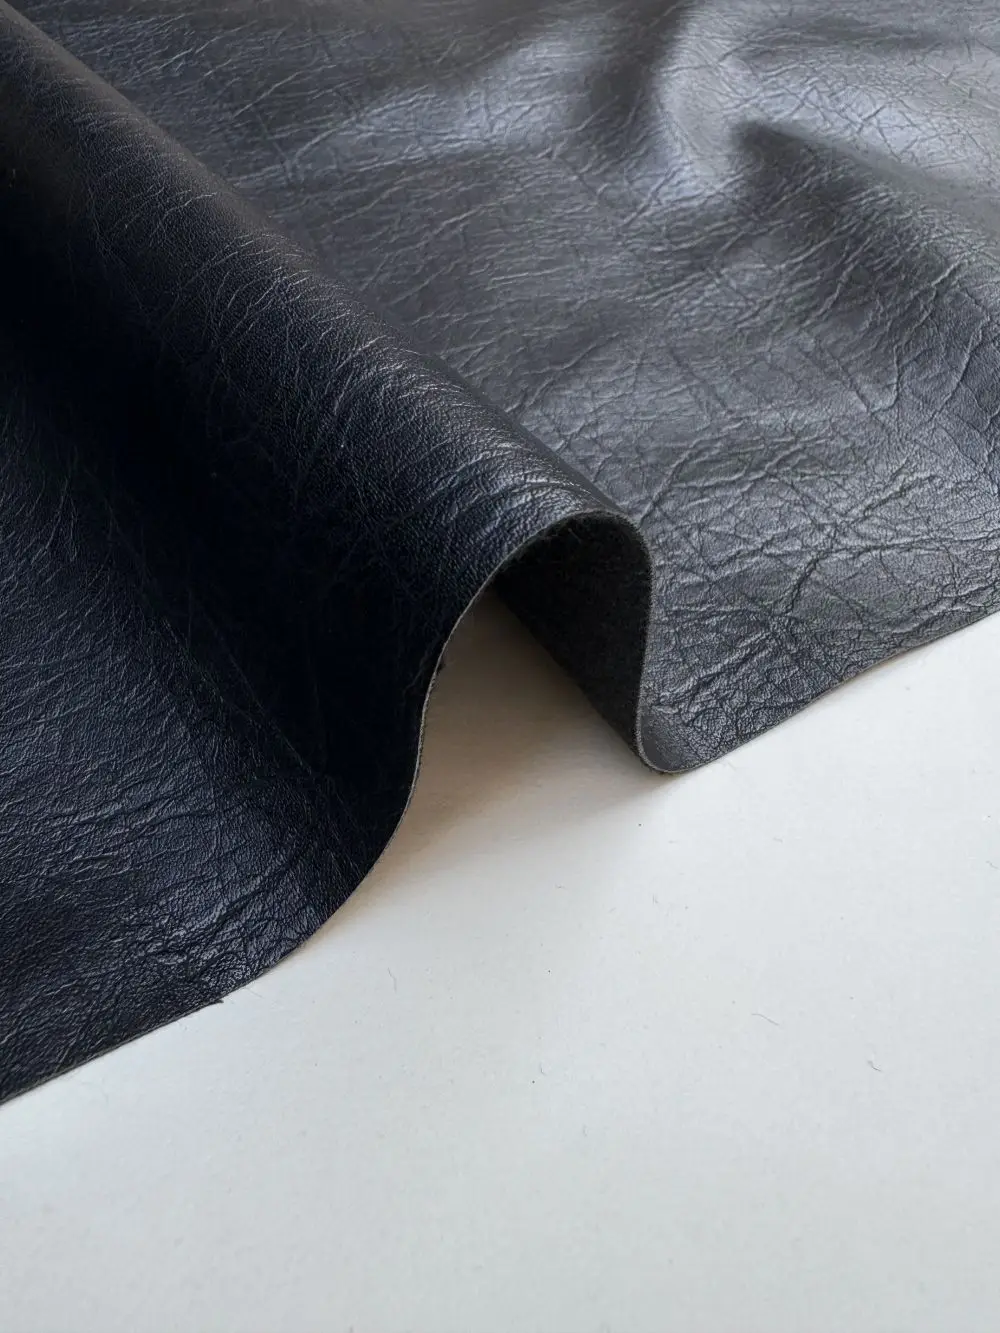 Best Selling High Quality Eco-friendly Pu Leather Fabric For Clothing ...